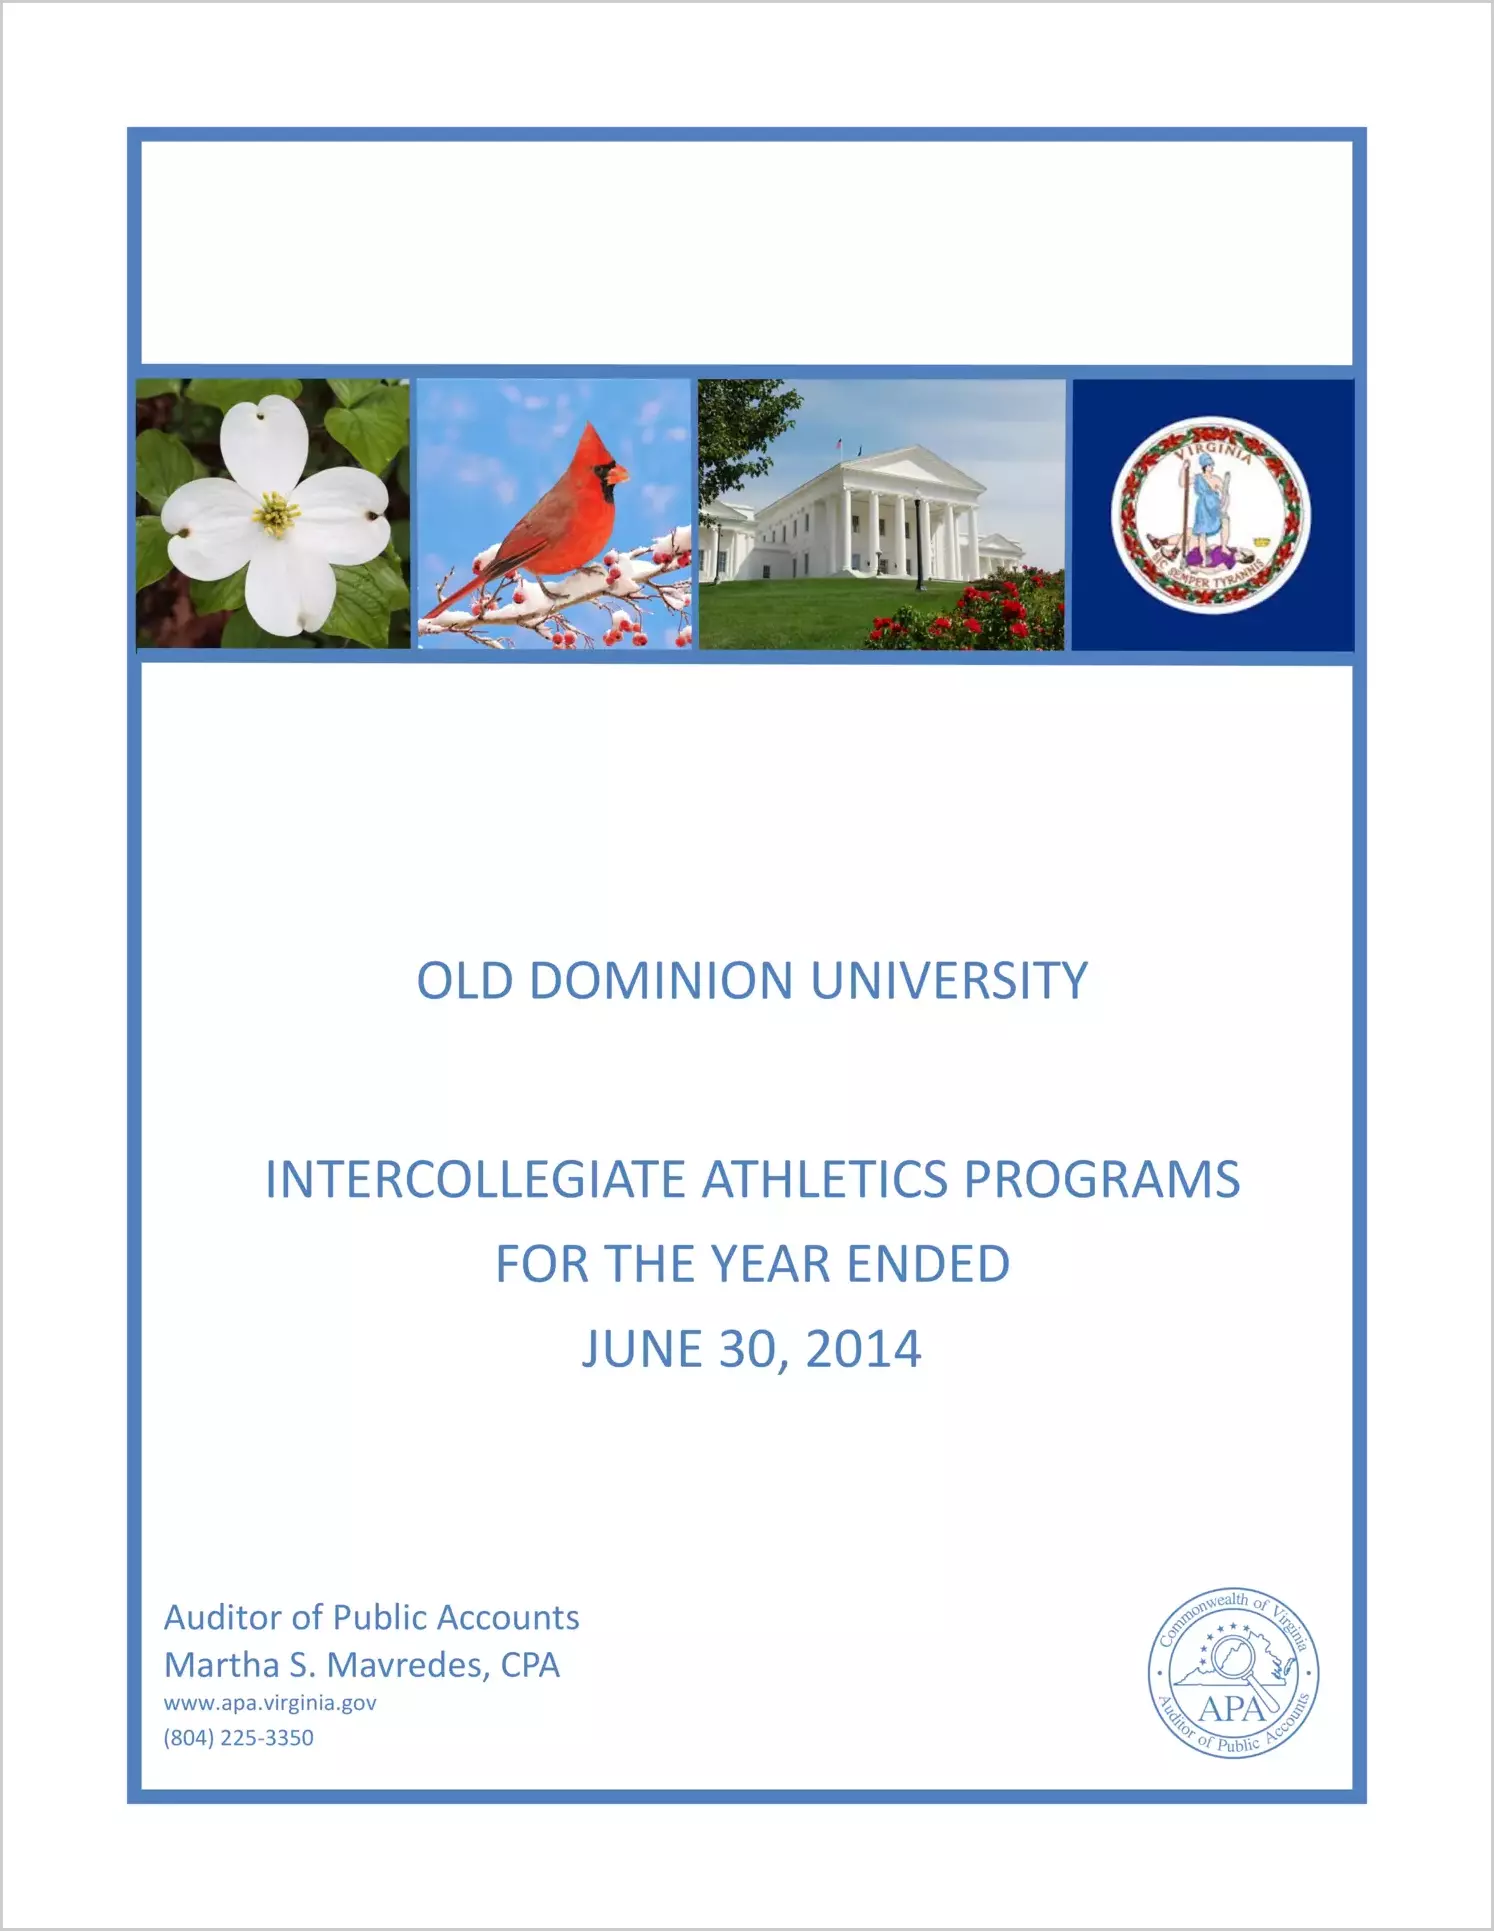 Old Dominion University Intercollegiate Athletics Programs for the year ended June 30, 2014